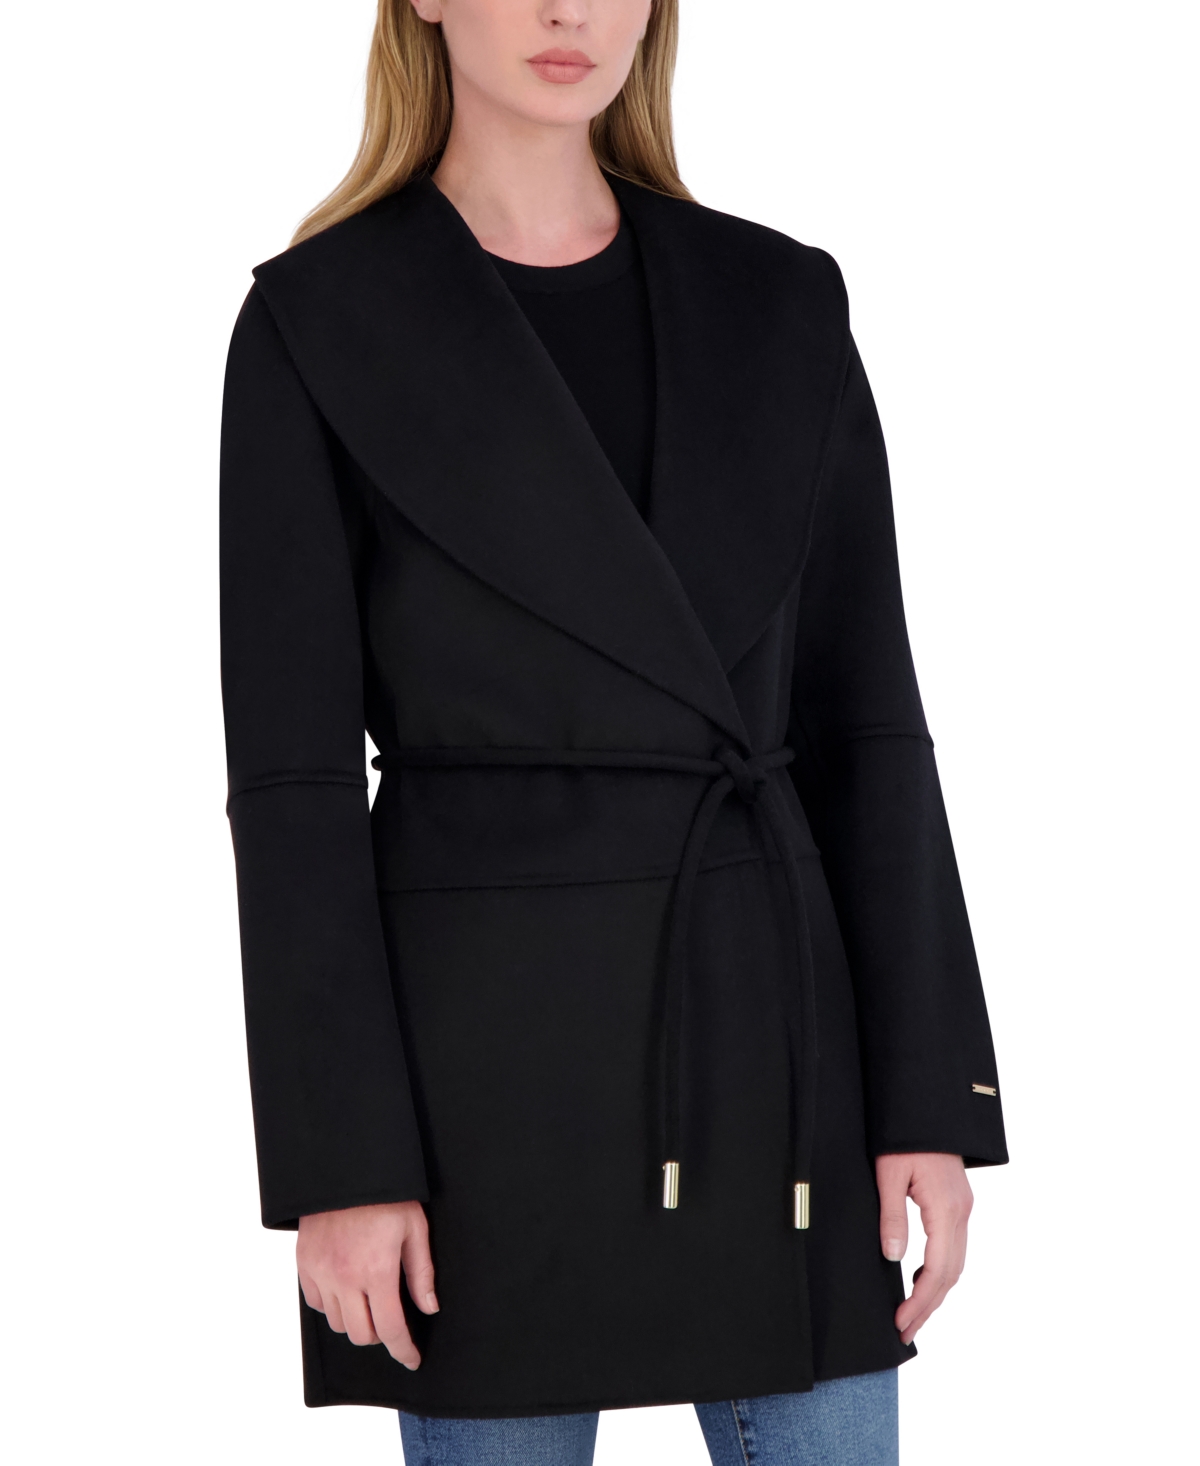 Tahari Women's Doubled-Faced Rope Belted Wrap Coat - Soft Almond